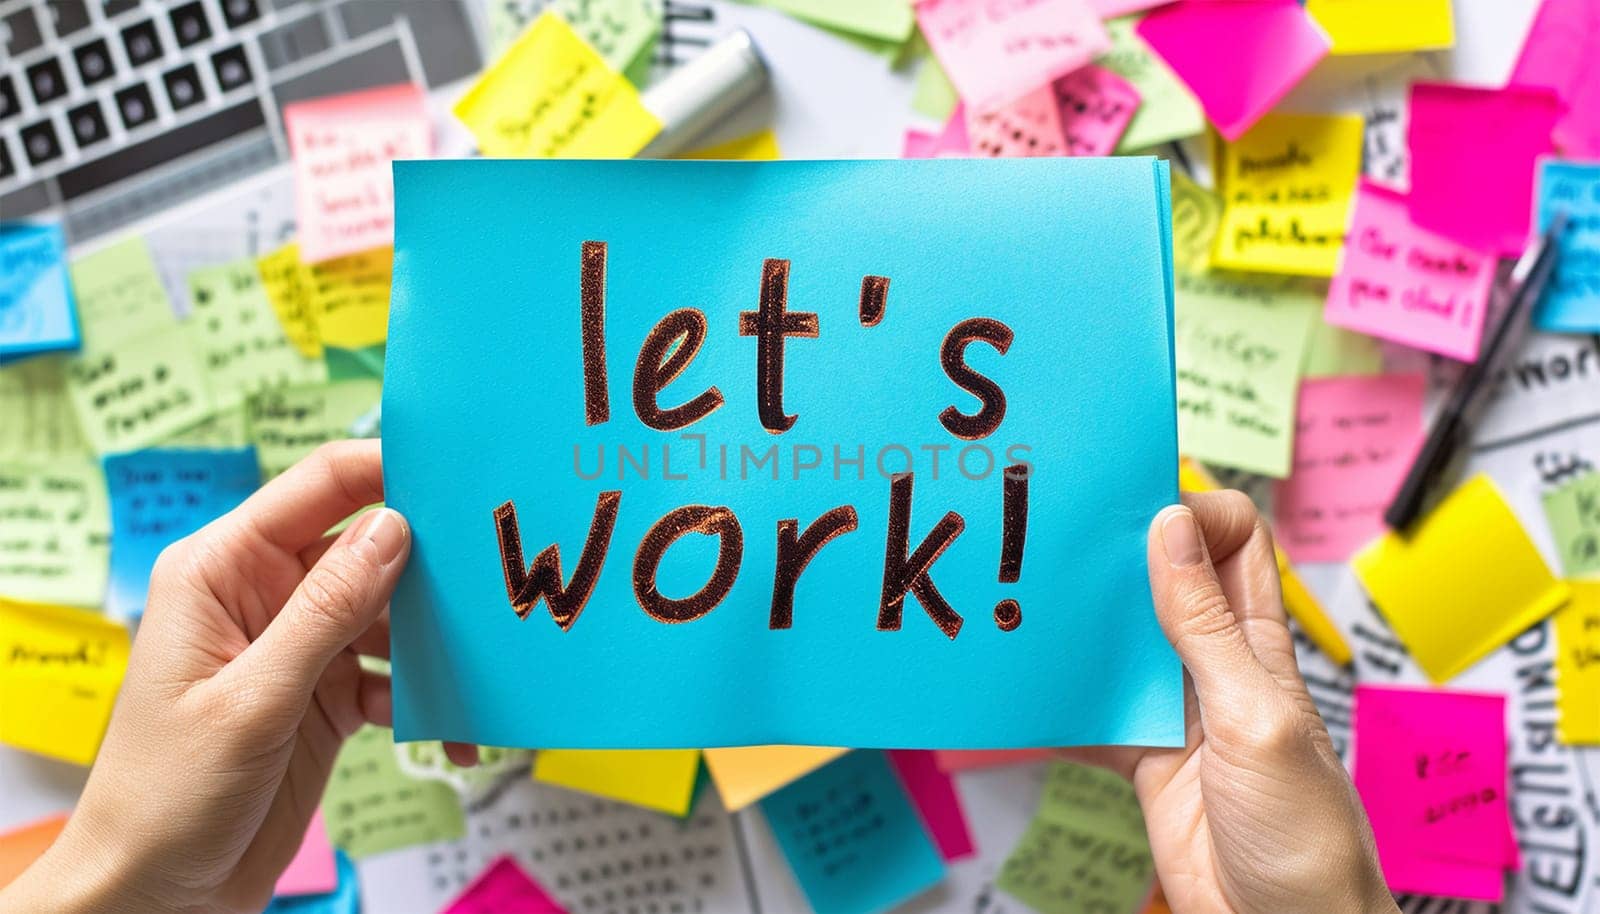 Sticky note in office room or work place with the text "Let's work" text on a sticky, pen, Desk with business decoration. Brainstorming motivation concept by Annebel146